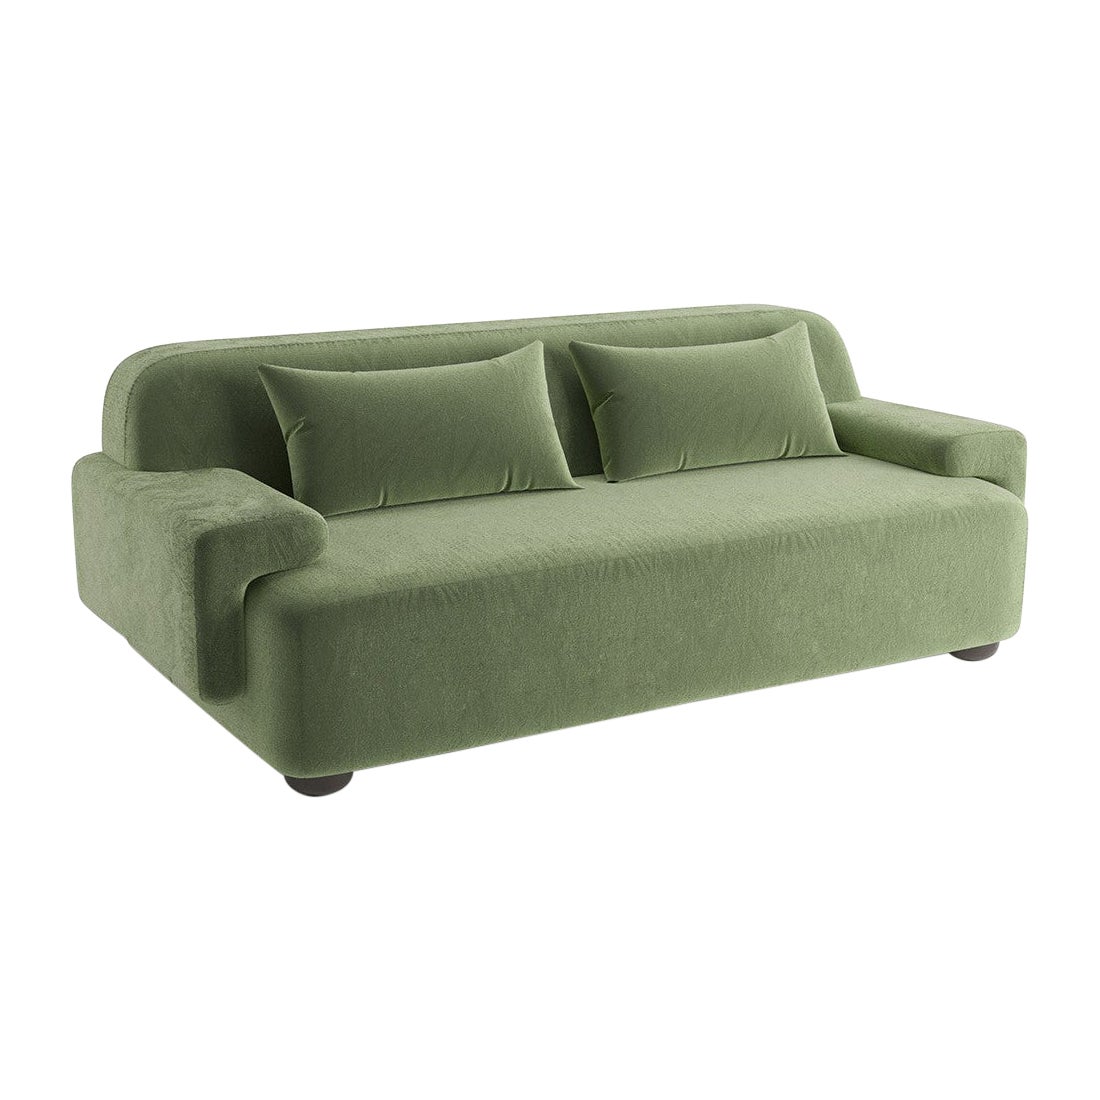 Popus Editions Lena 3-Seater Sofa in Green Verone Velvet Upholstery For Sale